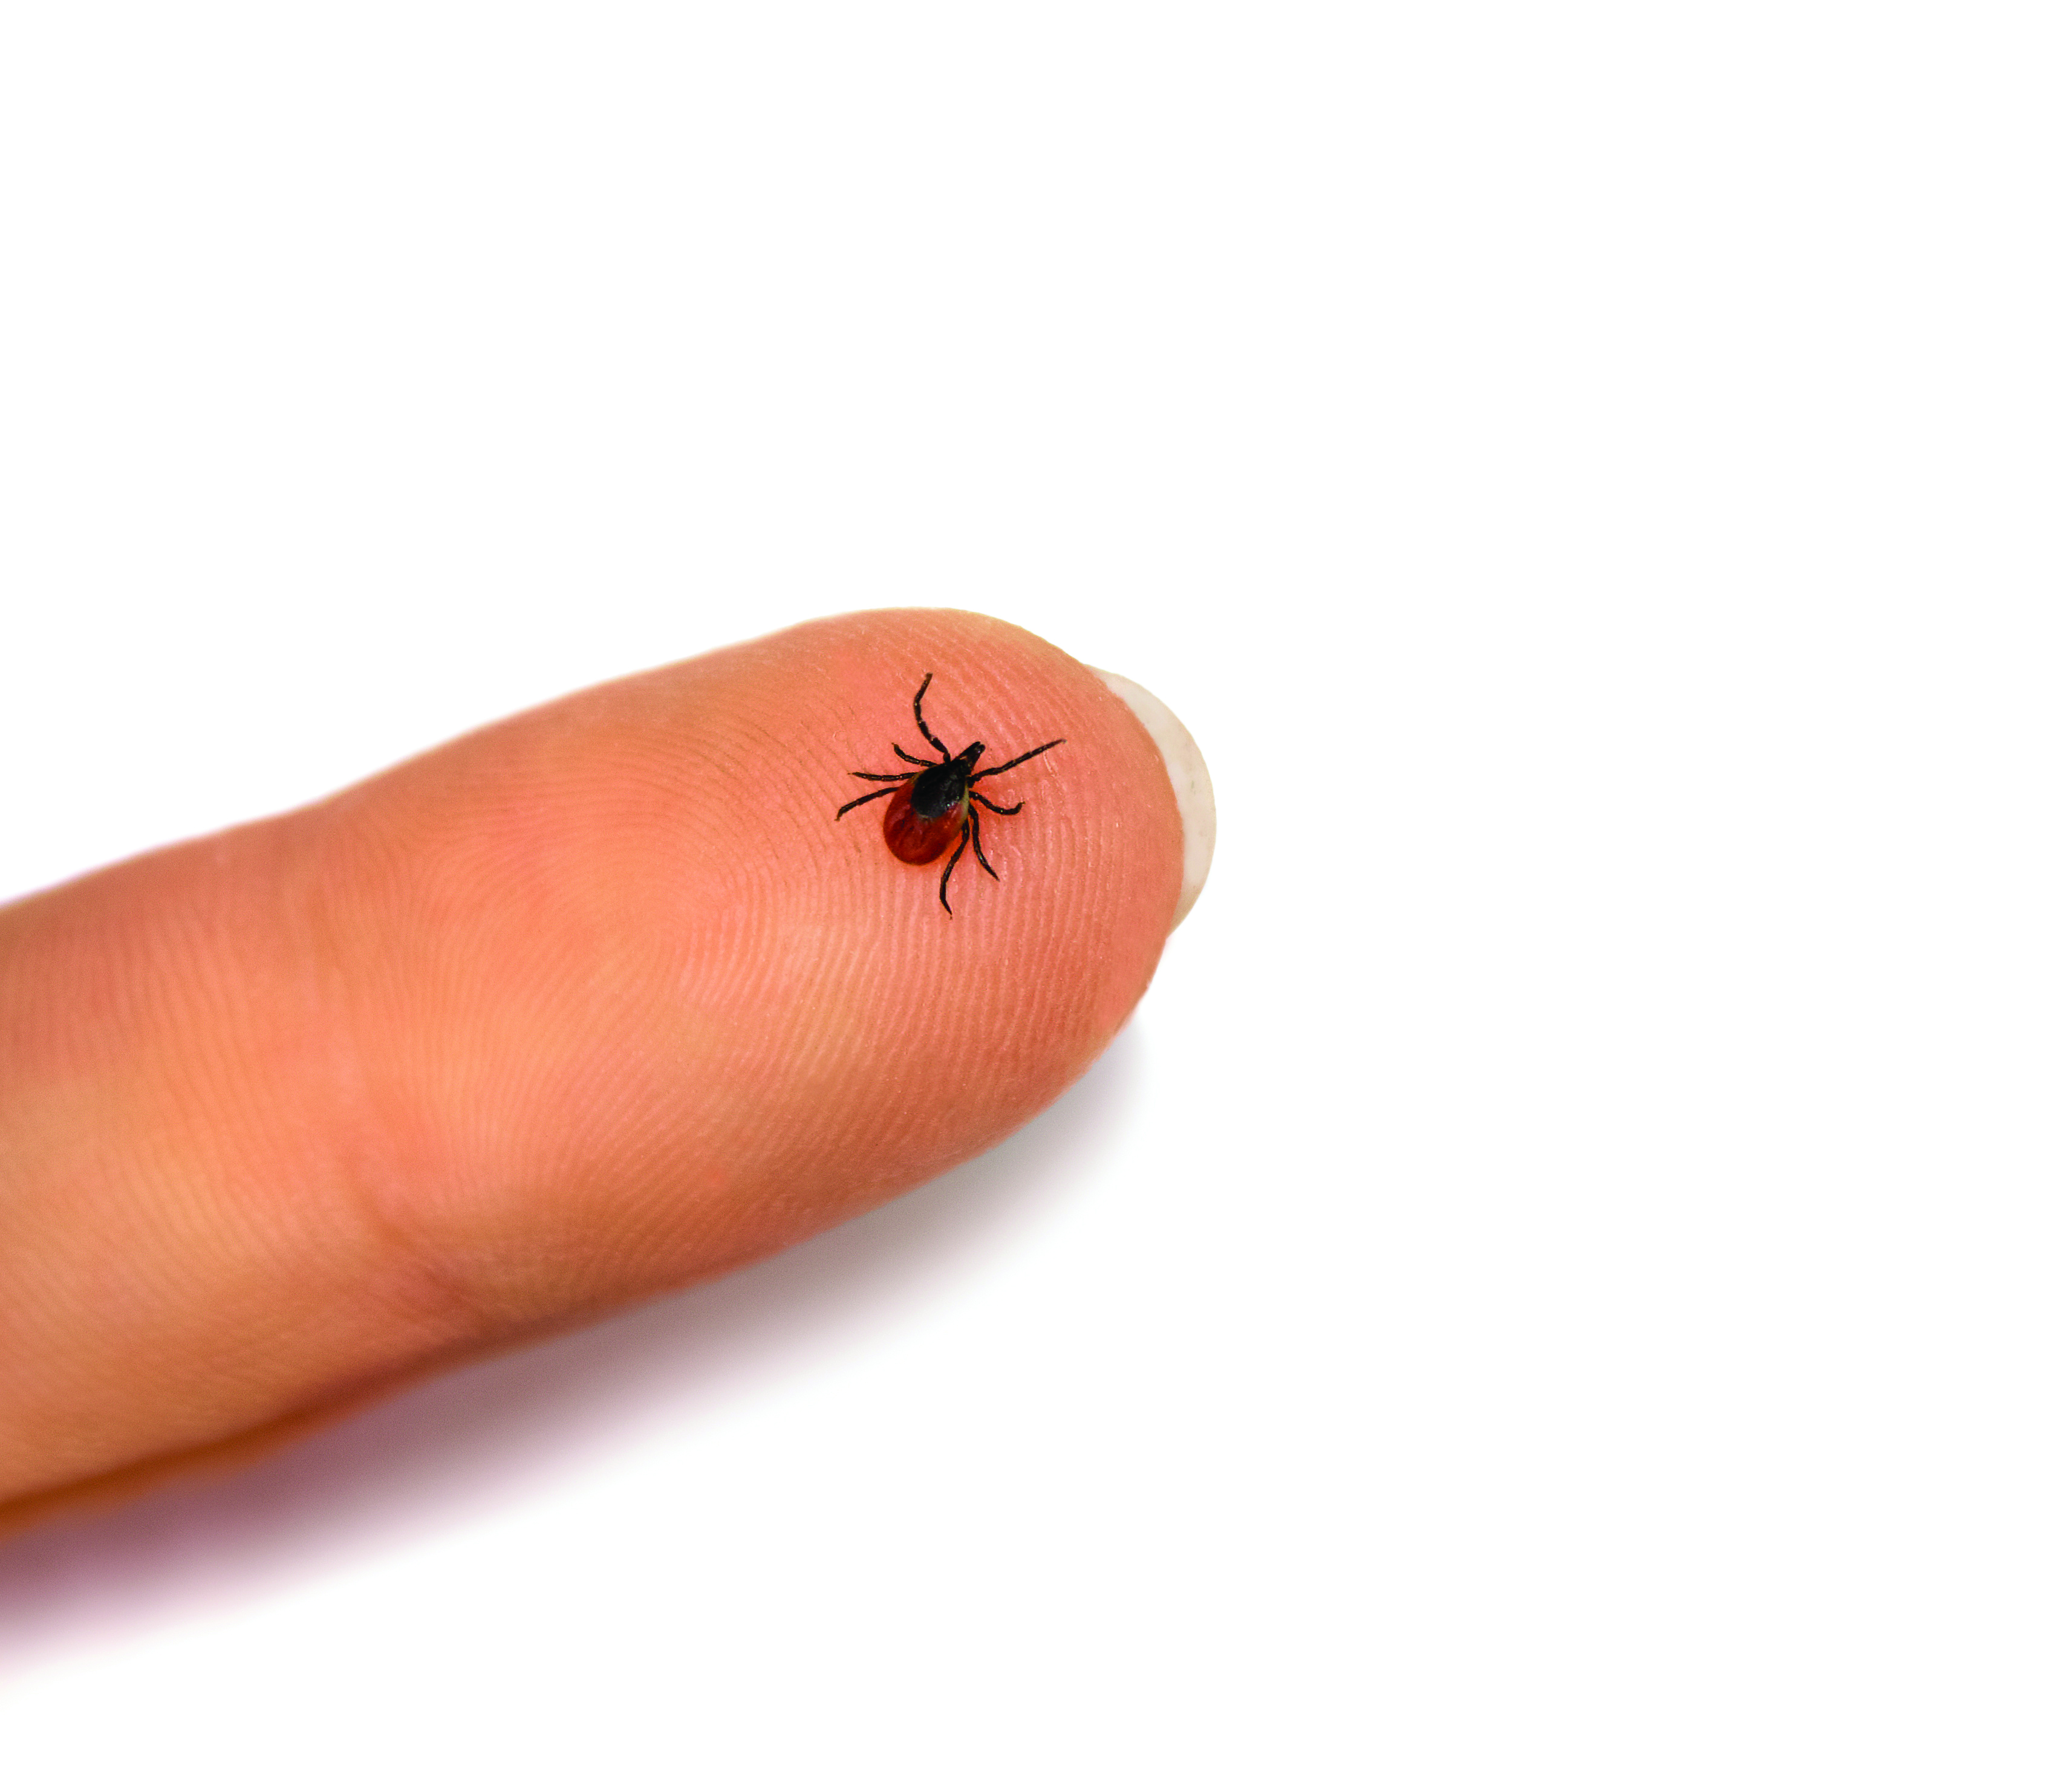 How Do I Know if I Have Lyme Disease?